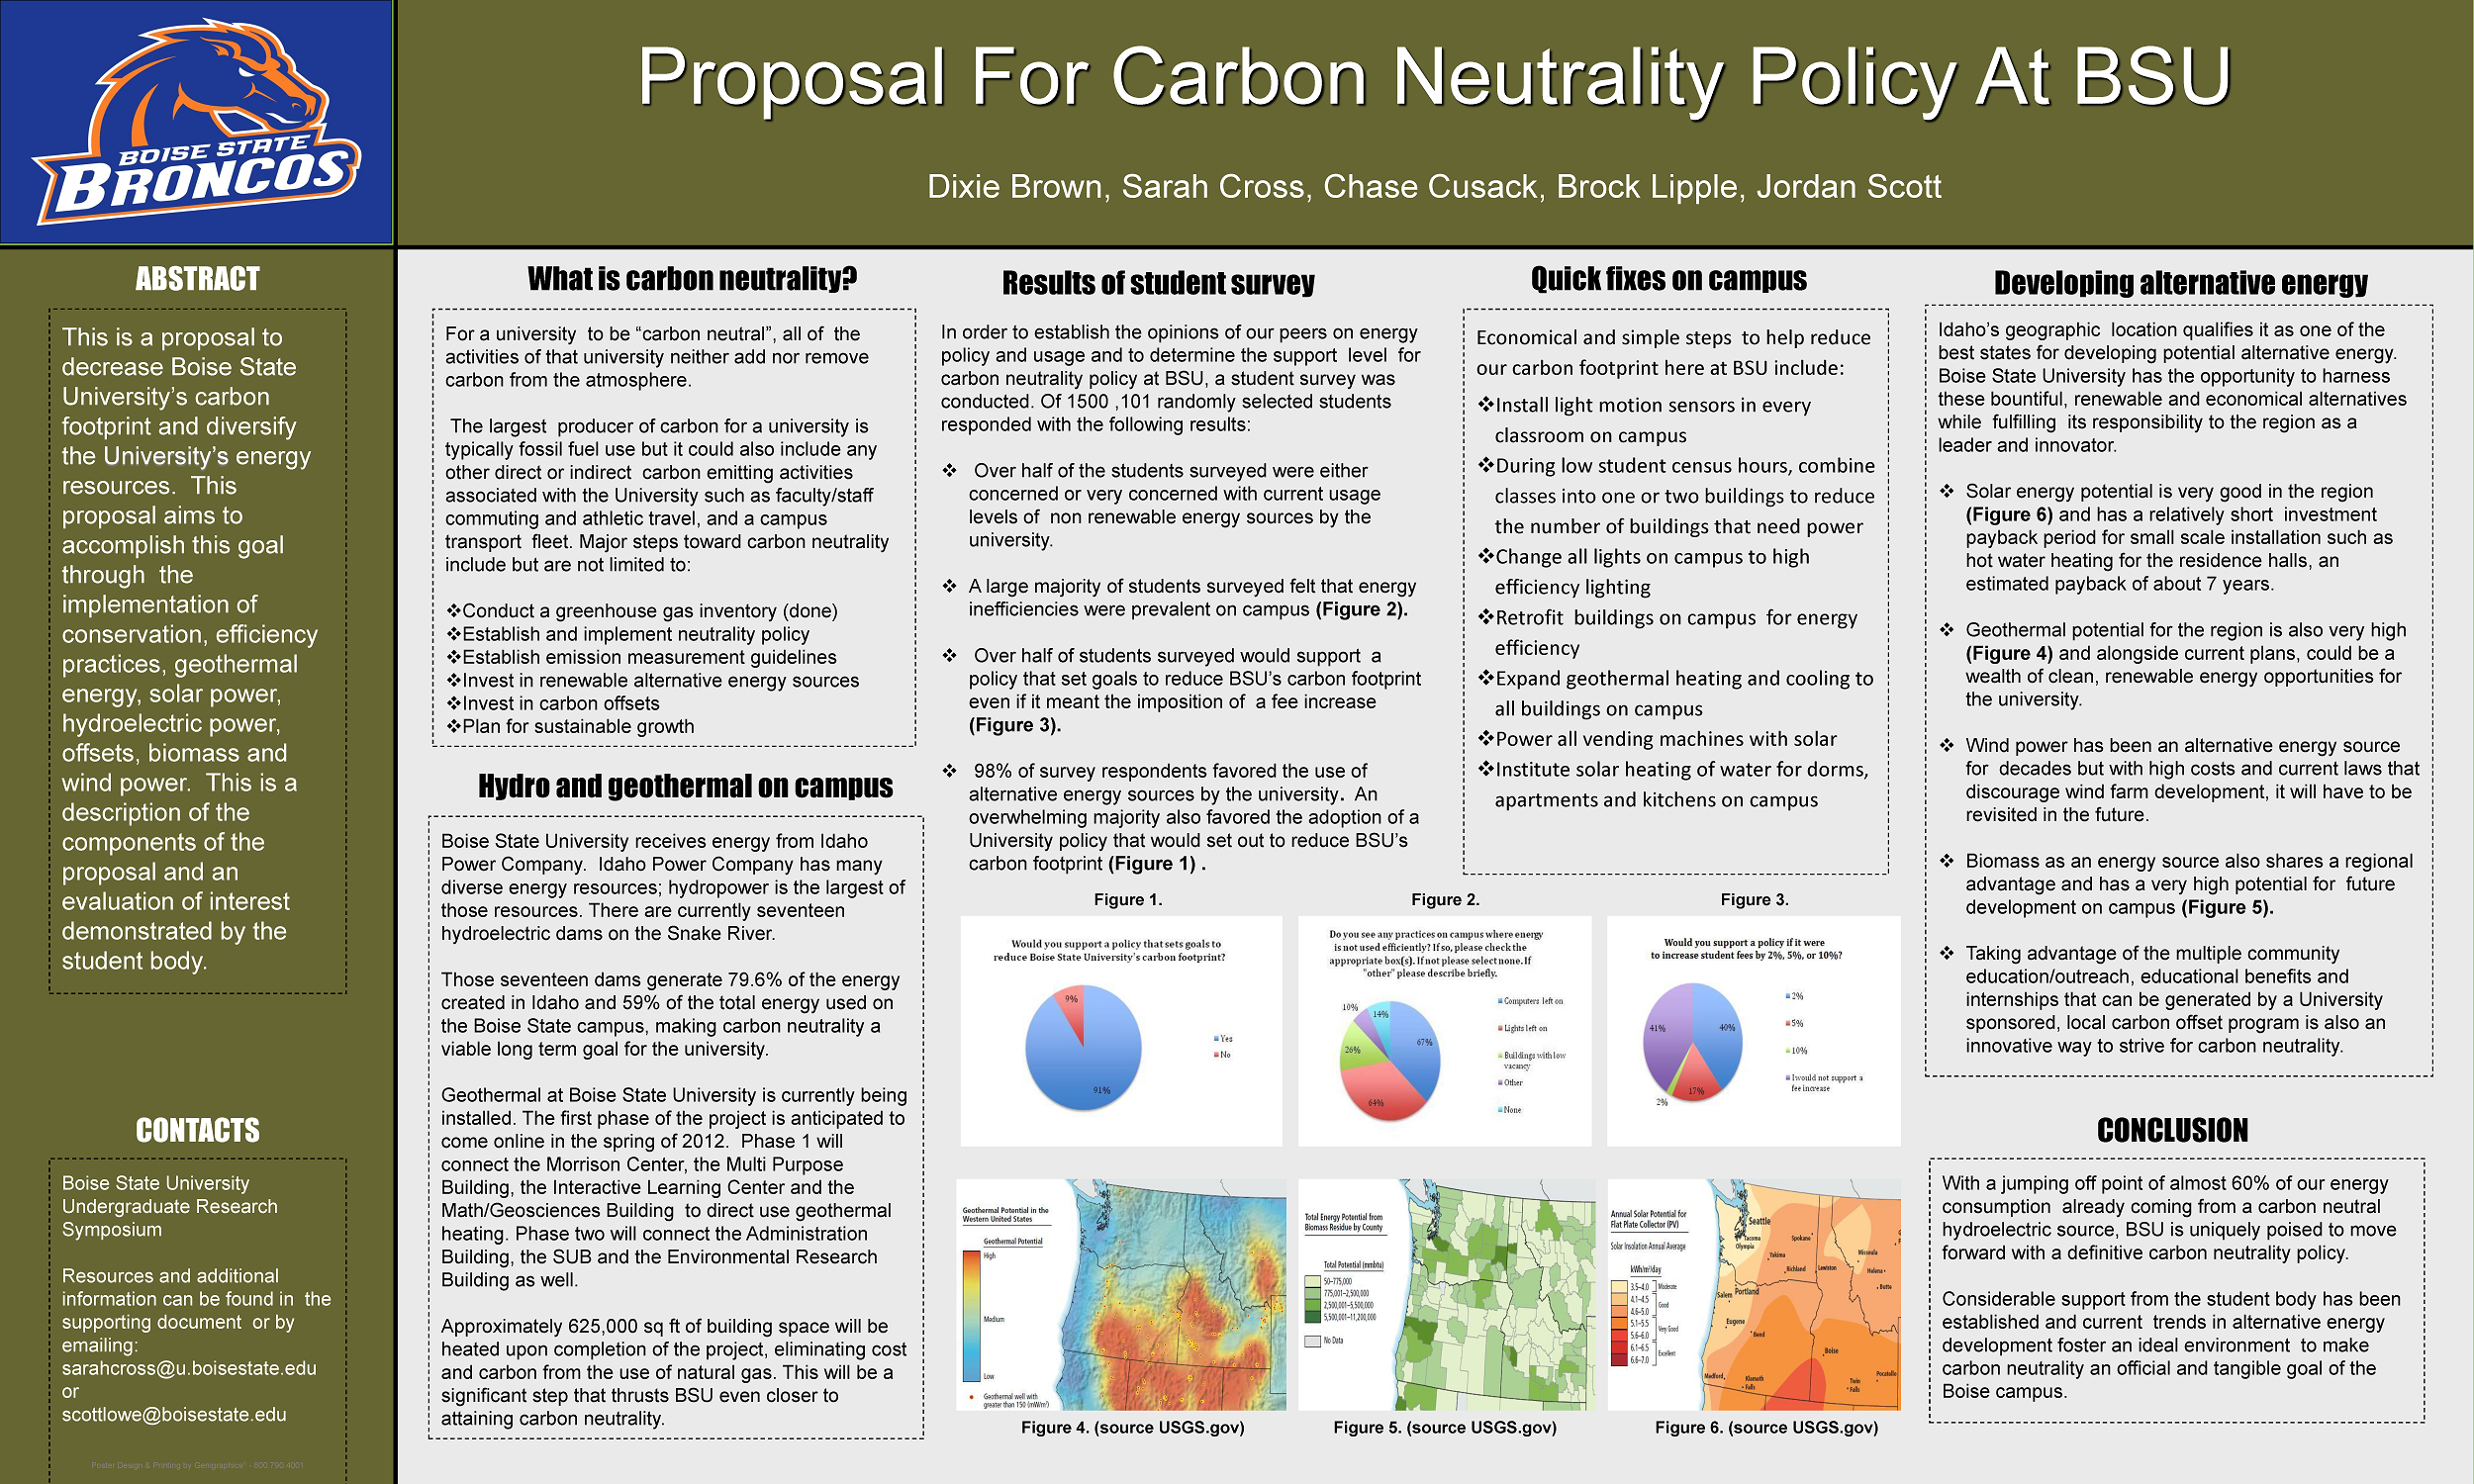 Carbon Neutrality poster, see page for text description or select to view full image